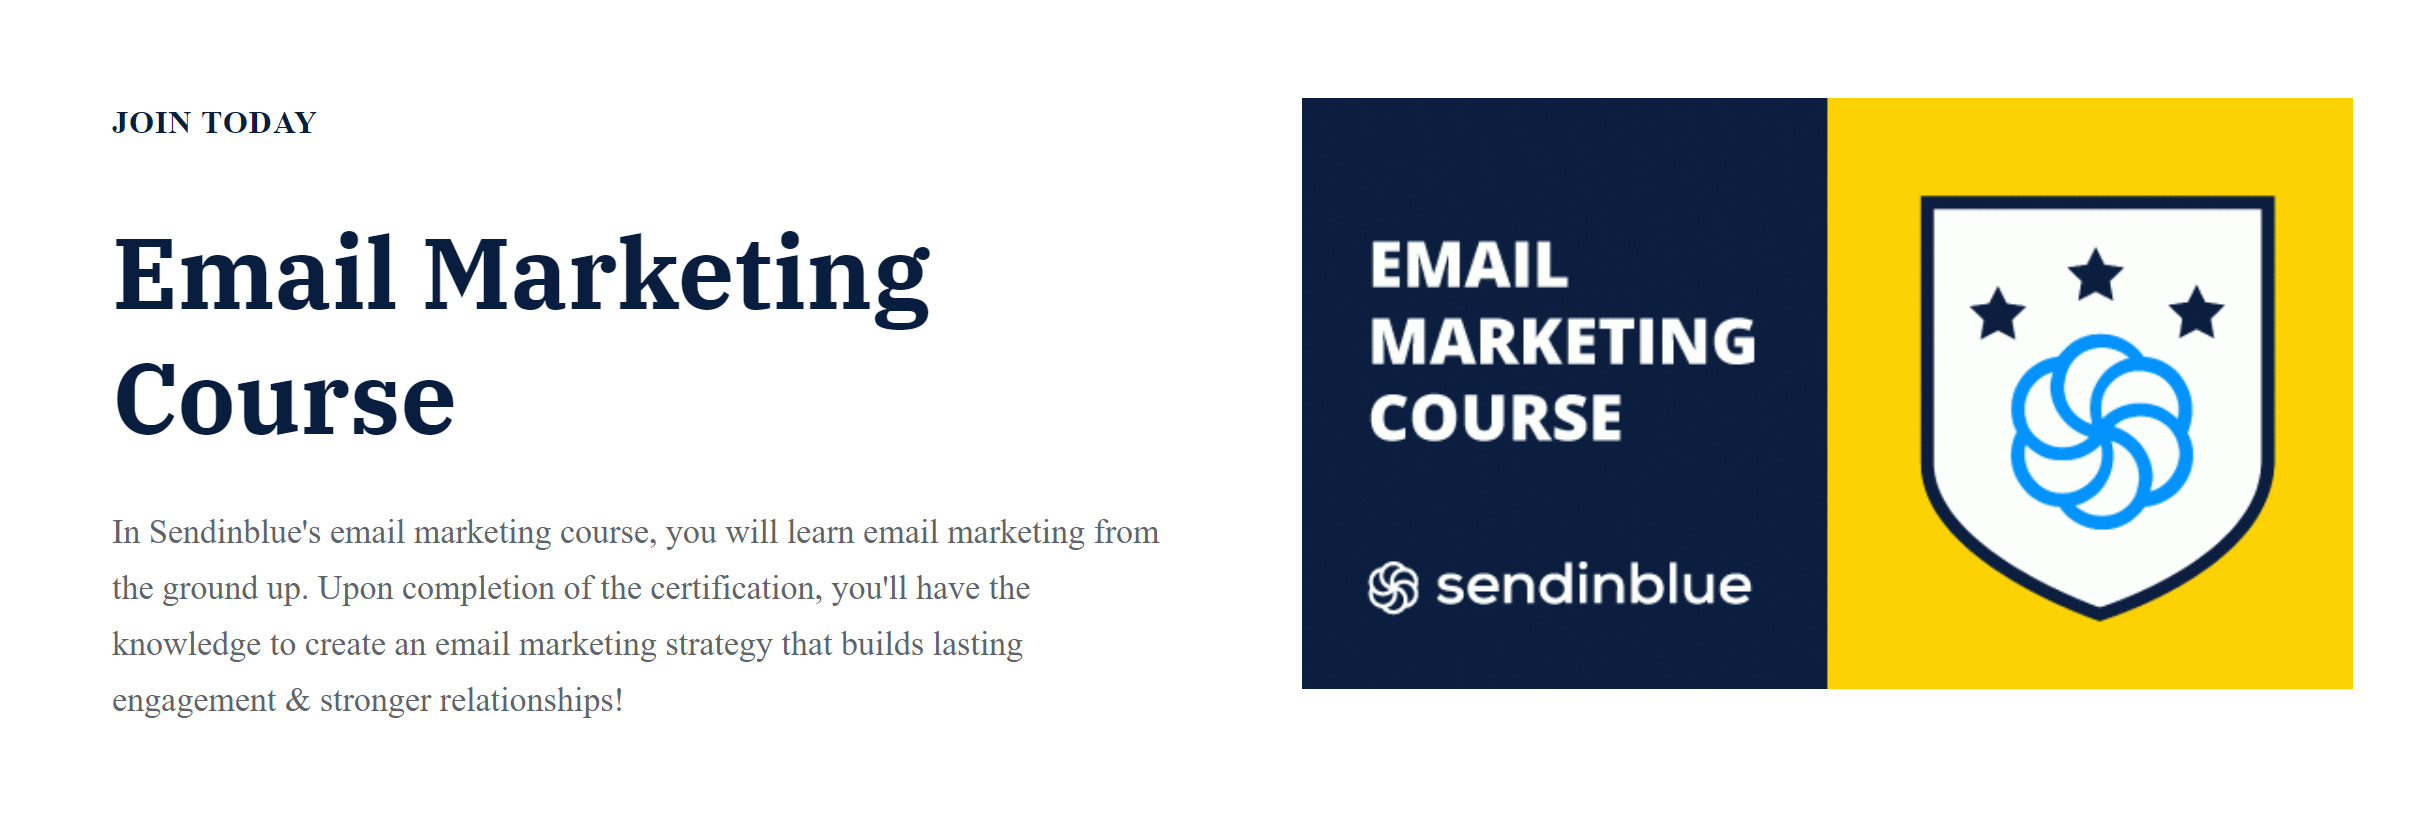 Email marketing course - beginner to advanced